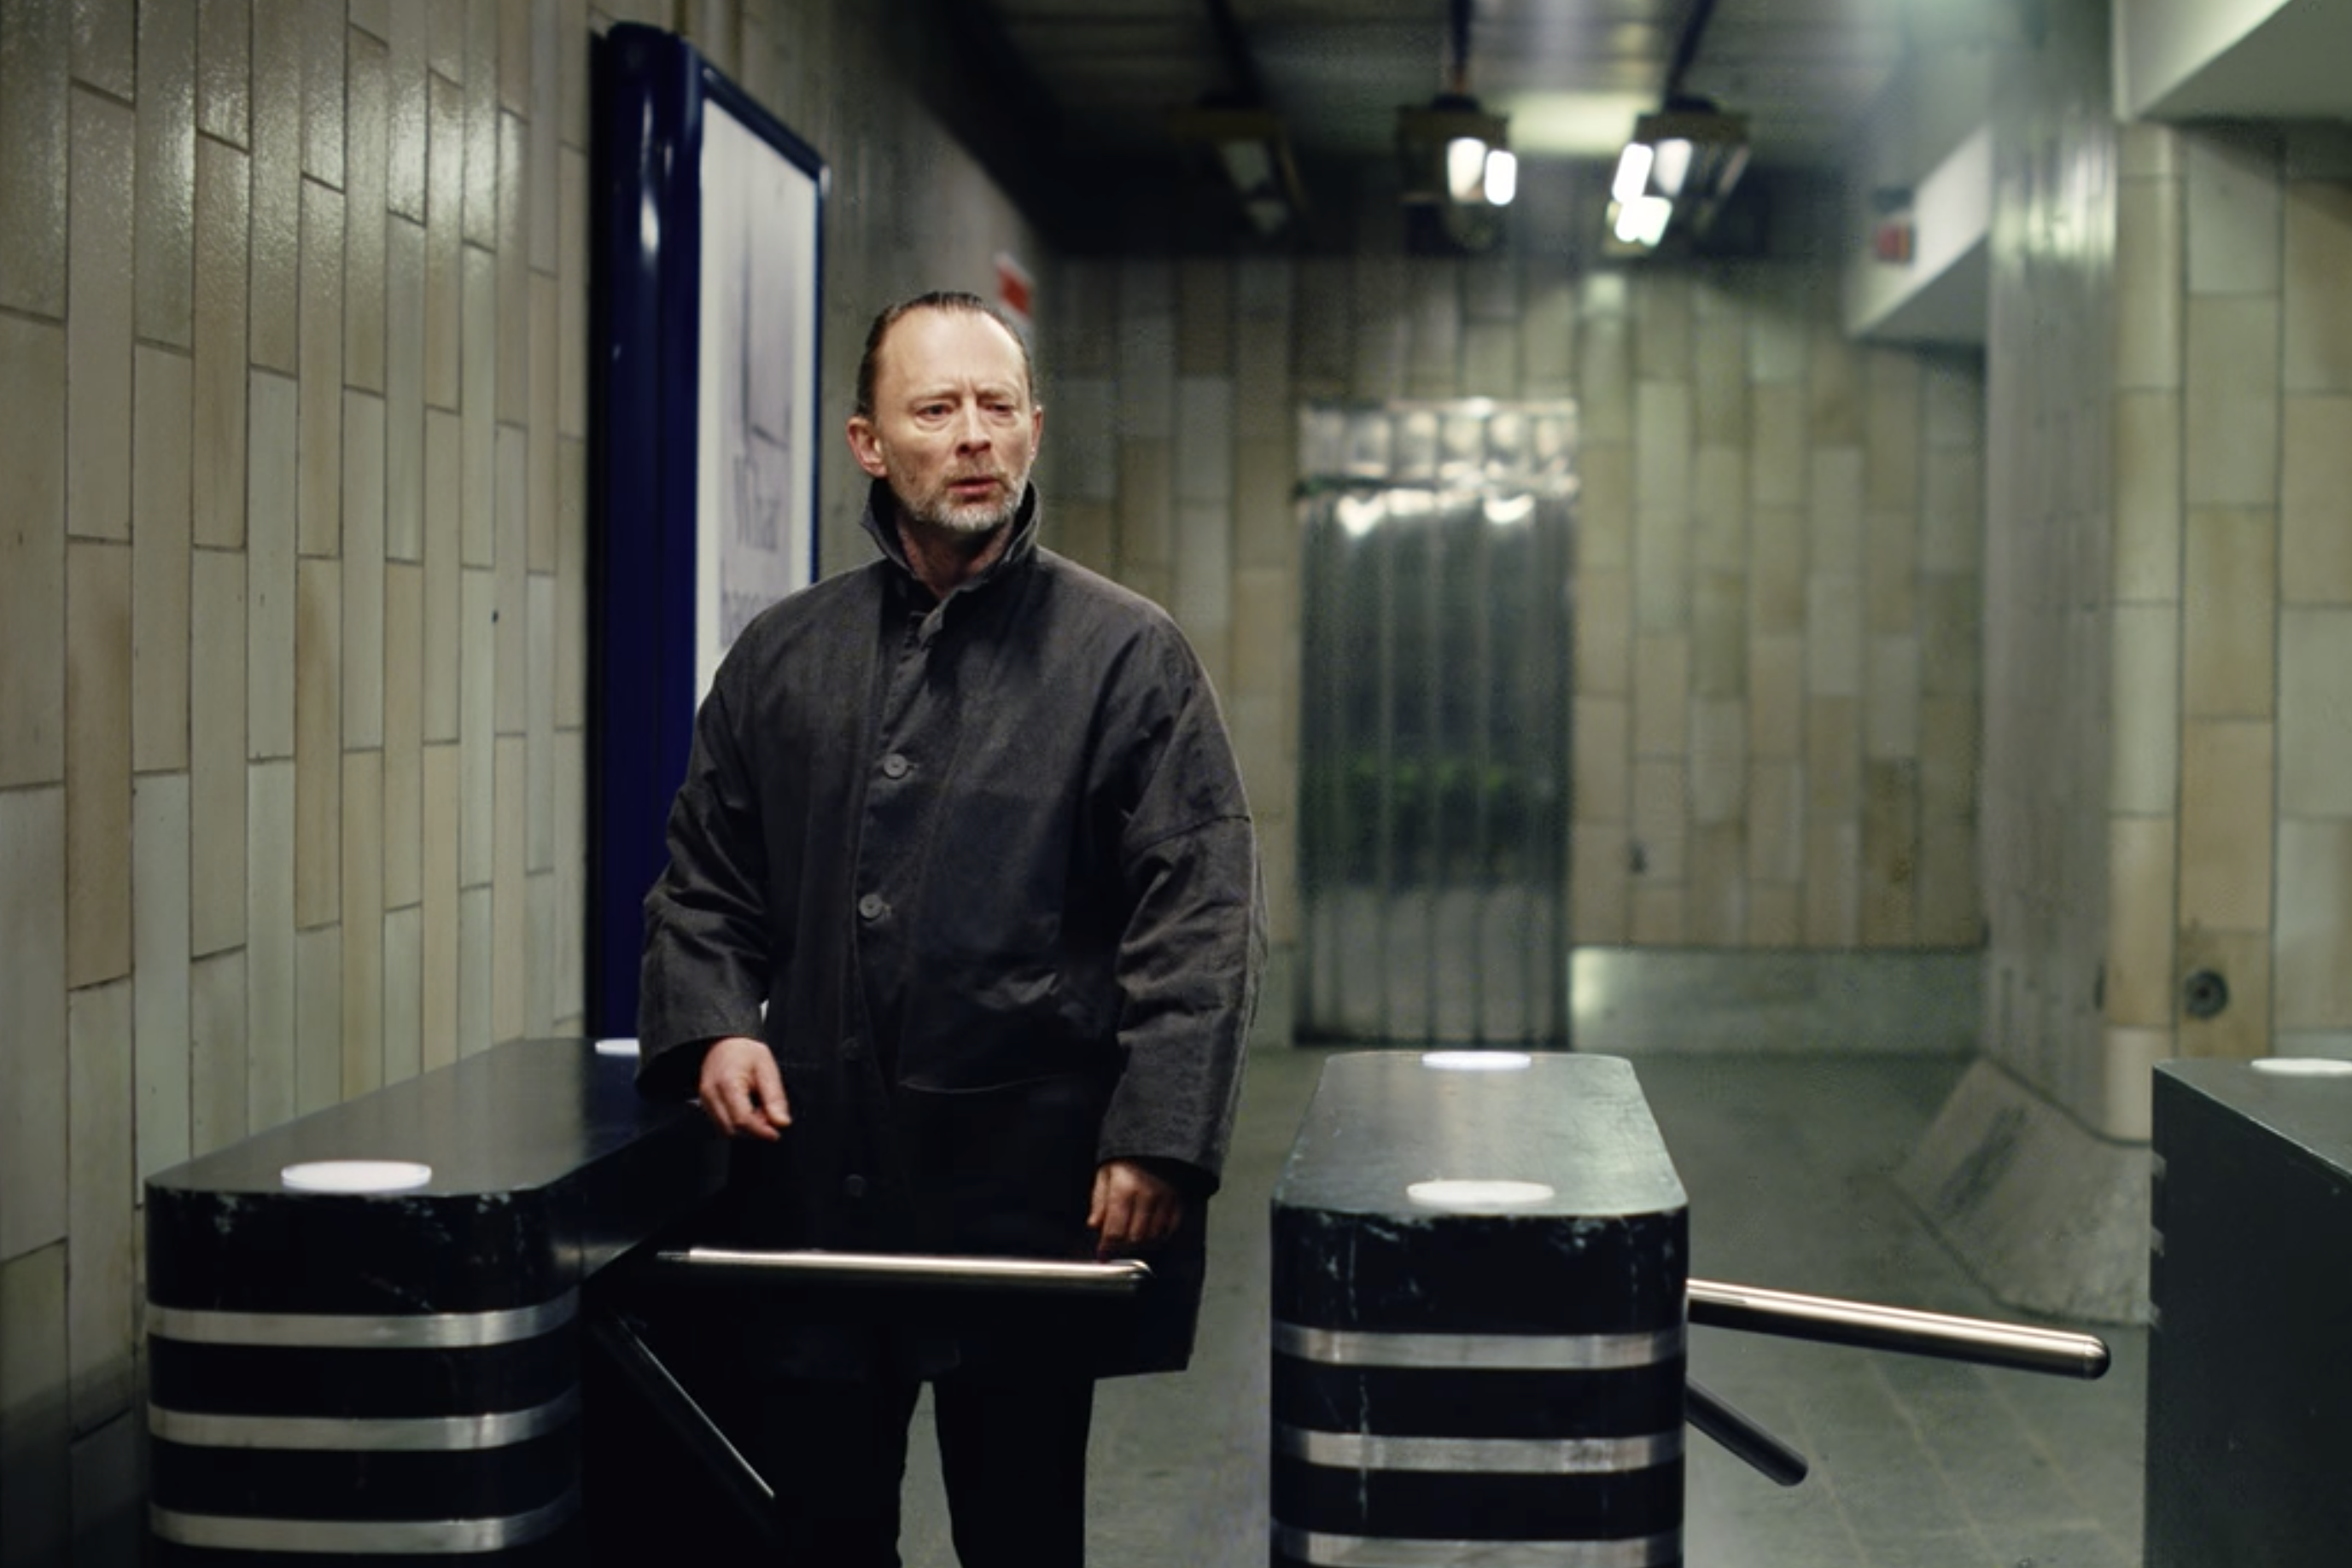 Thom Yorke at a subway turnstile, looking puzzled.